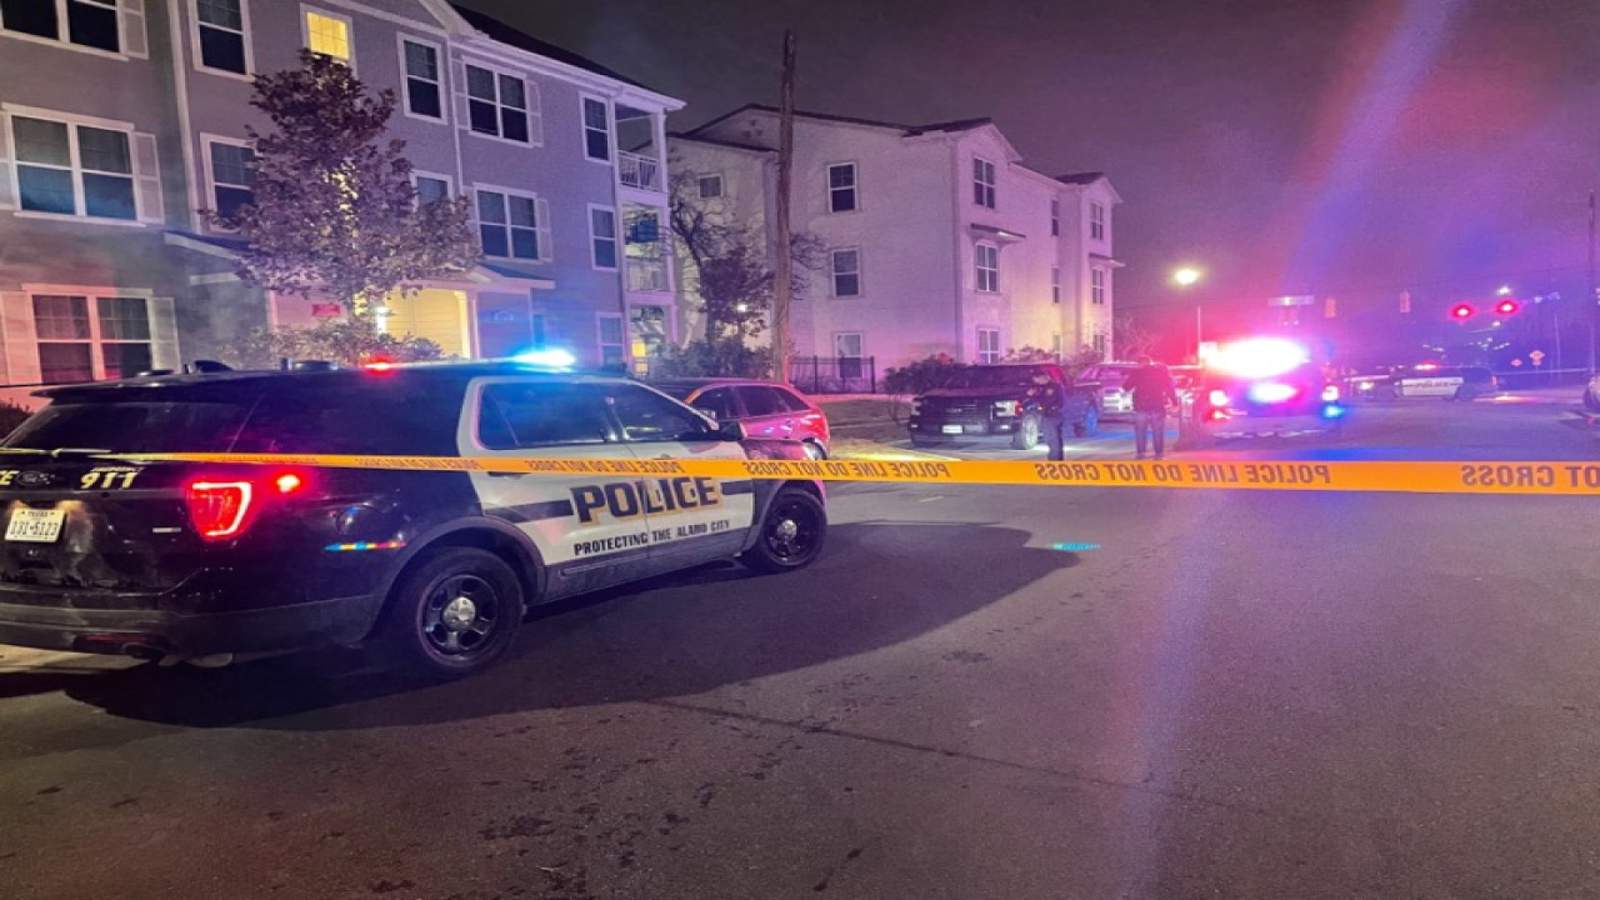 Man killed in police shootout after shooting his mother’s friend in East Side apartment, chief said